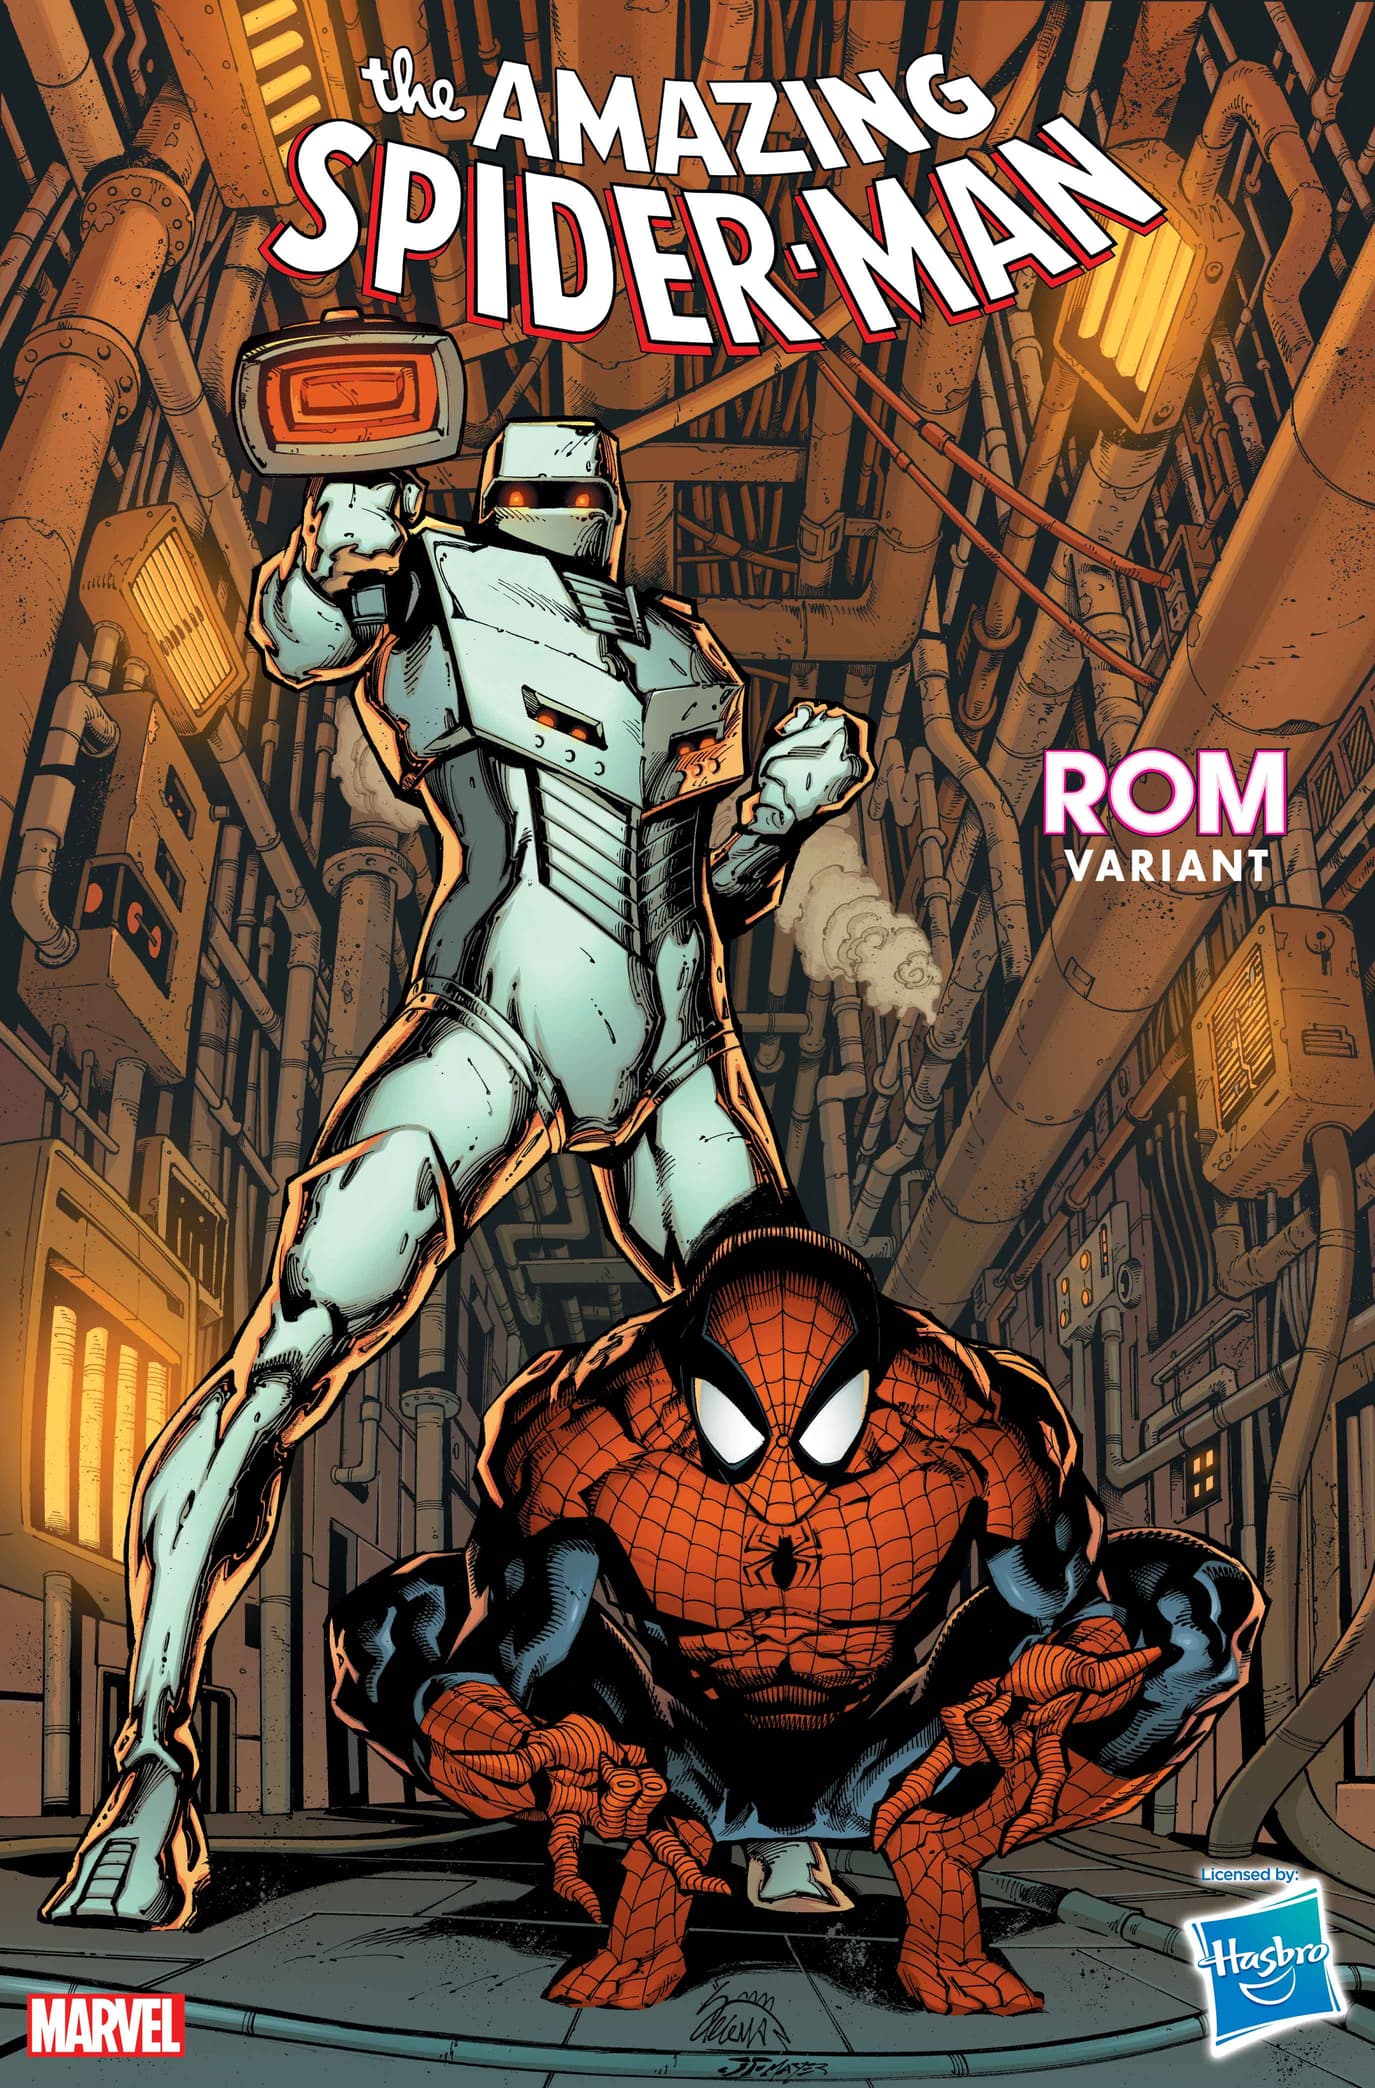 AMAZING SPIDER-MAN #41 Rom Variant Cover by Ryan Stegman